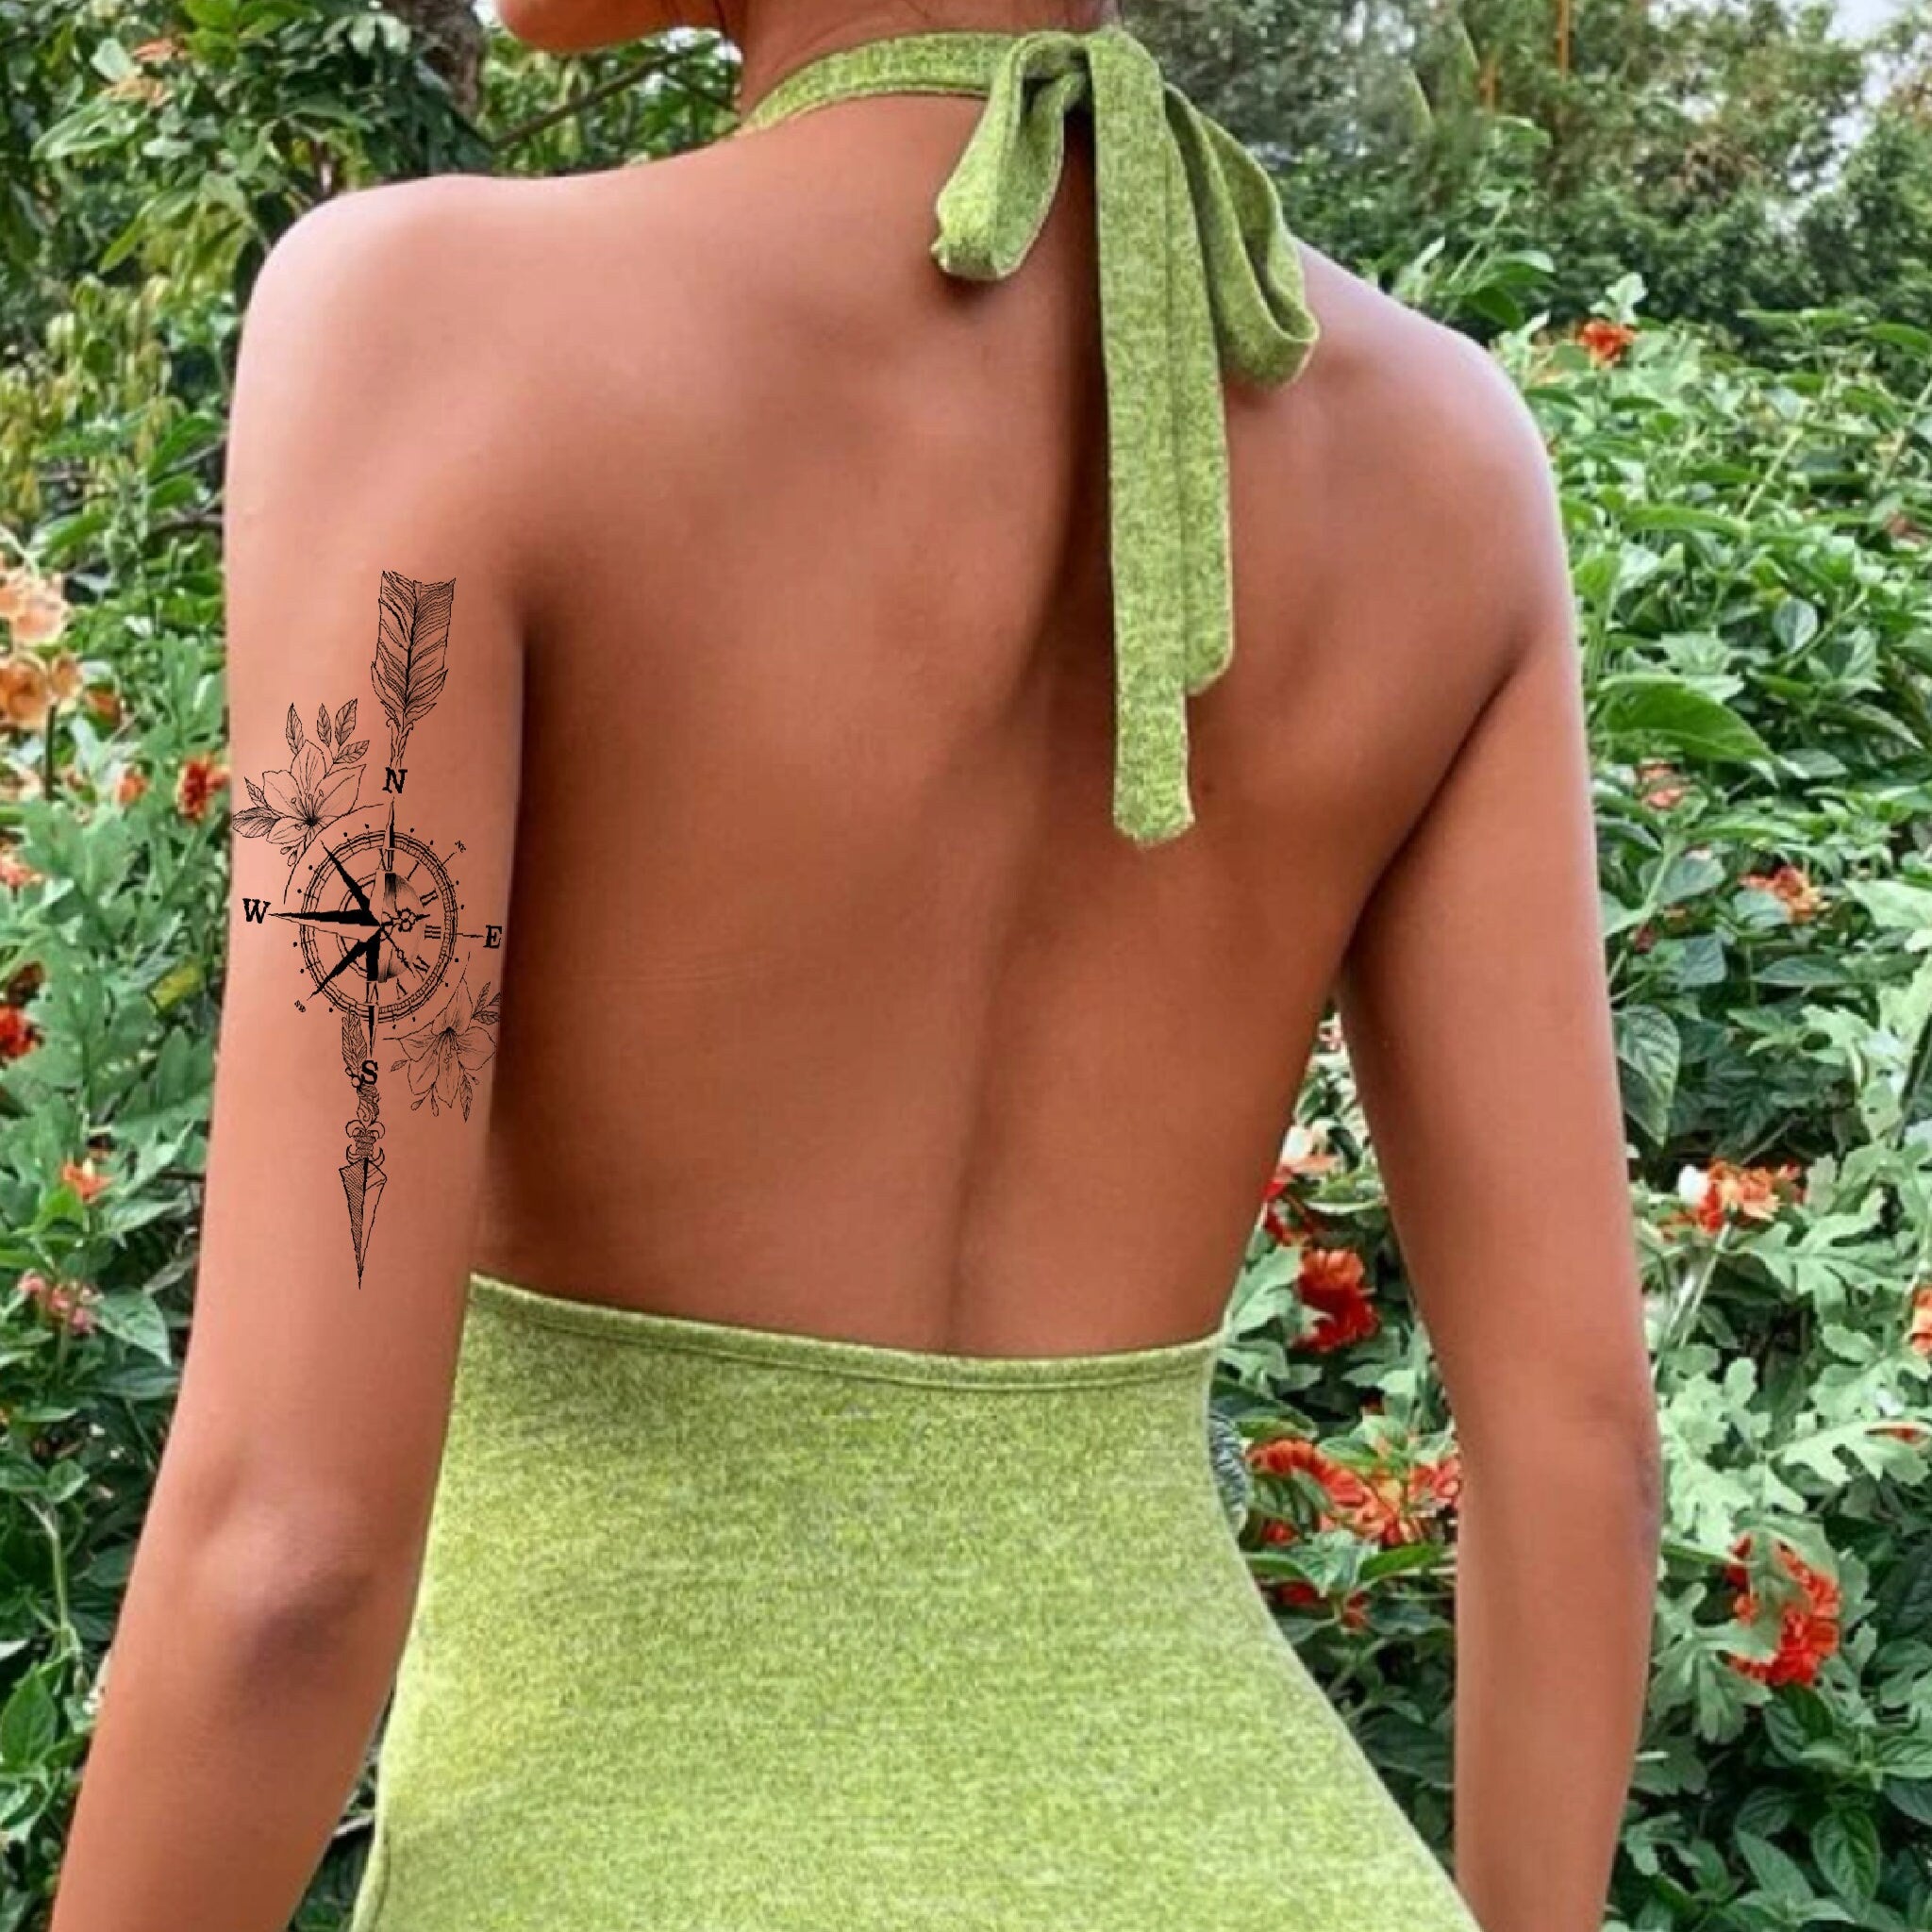 Pine tree compass tattoo on the back of the left arm.